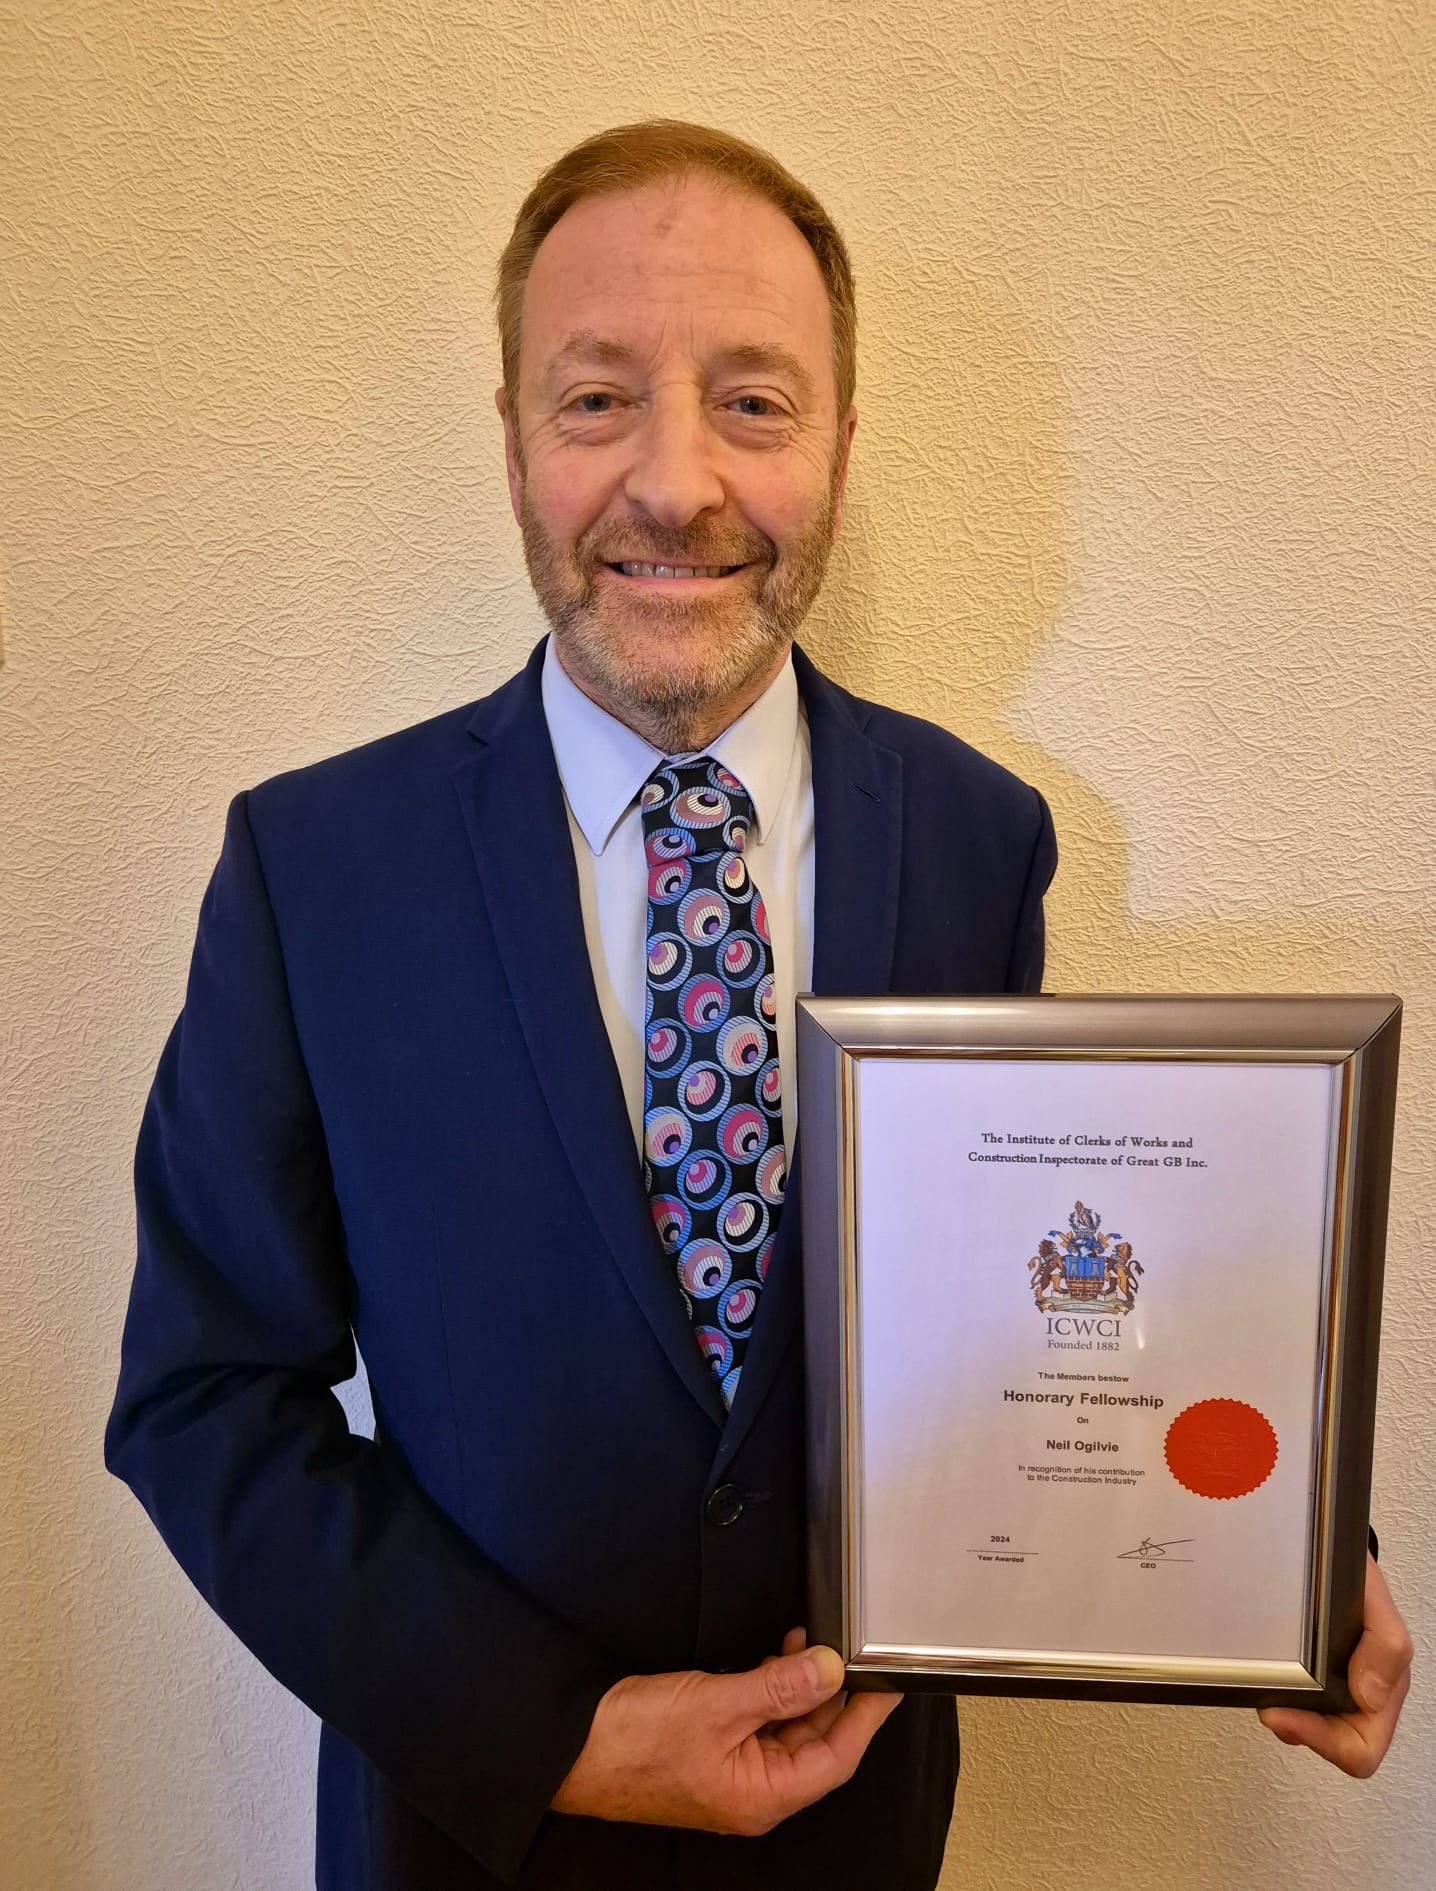 Painting and Decorating Association CEO awarded honorary fellowship